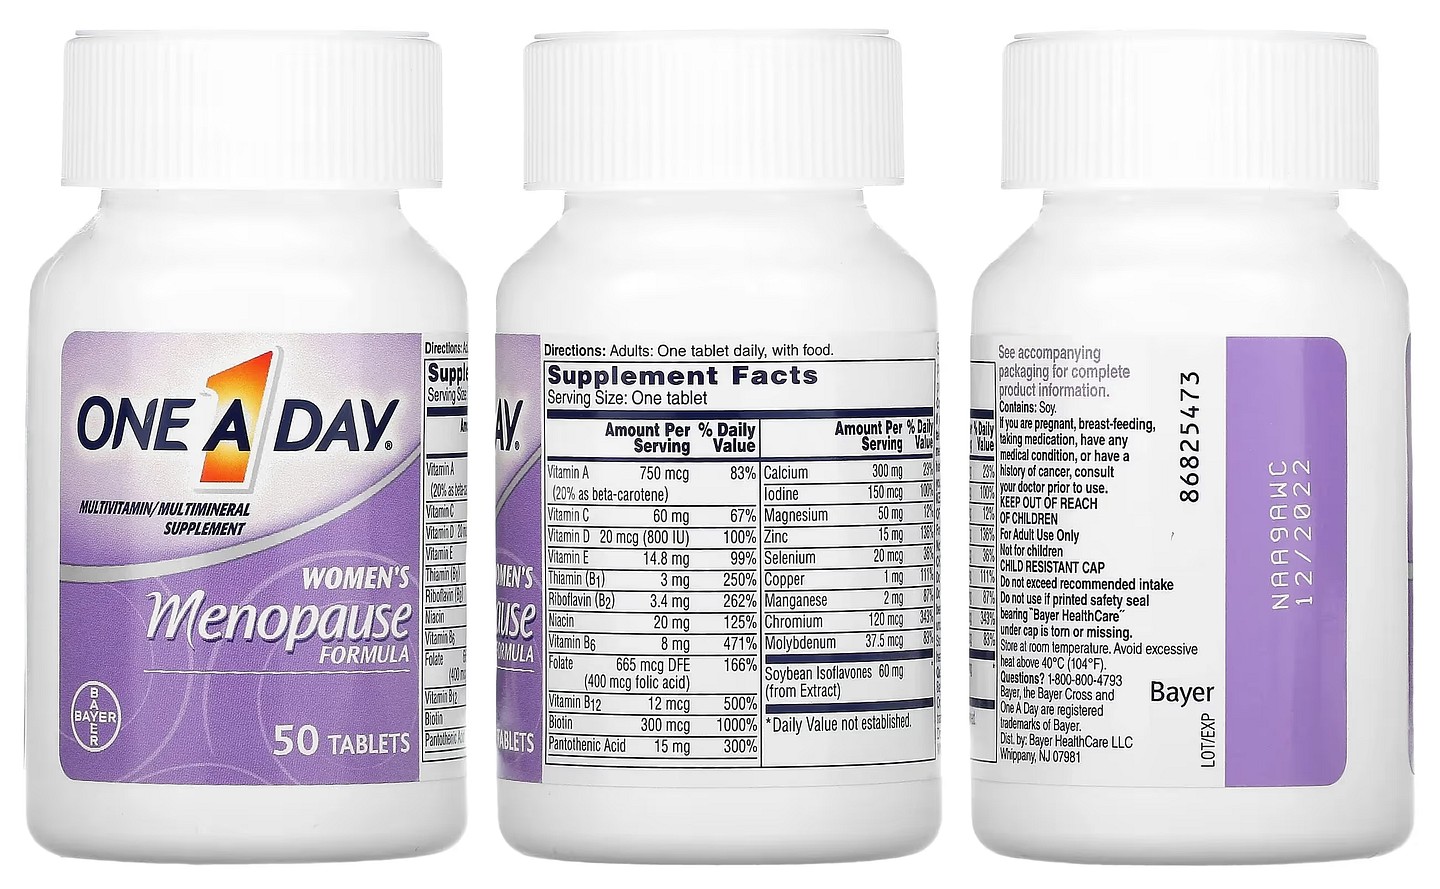 One-A-Day, Women's Menopause Formula packaging